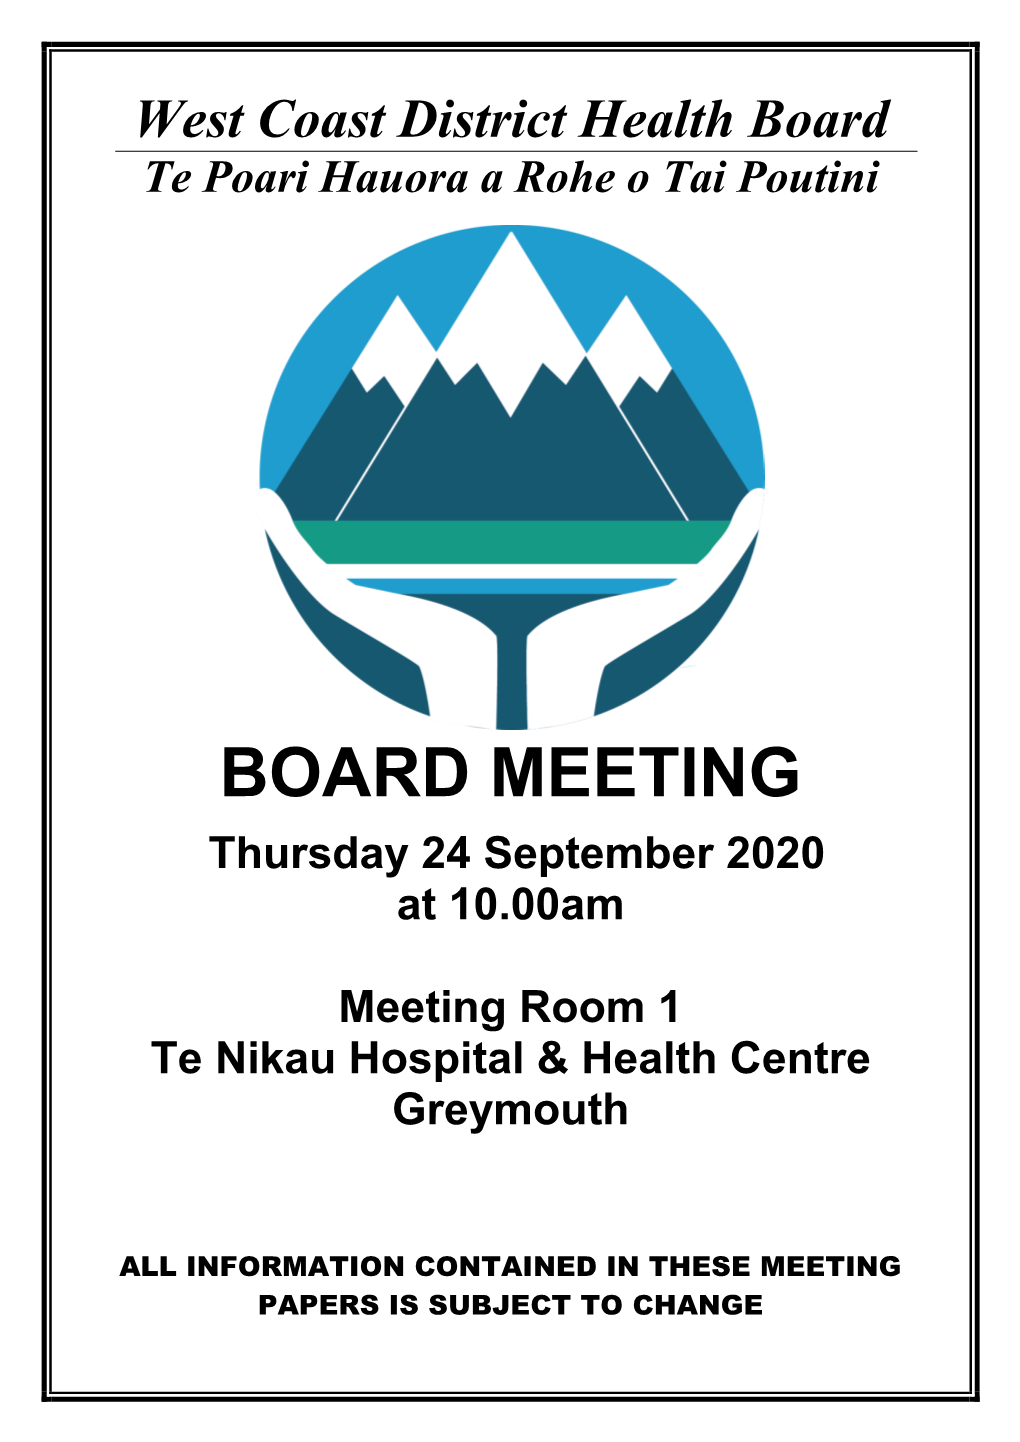 Board Papers for the West Coast DHB Board Meeting Thursday 24